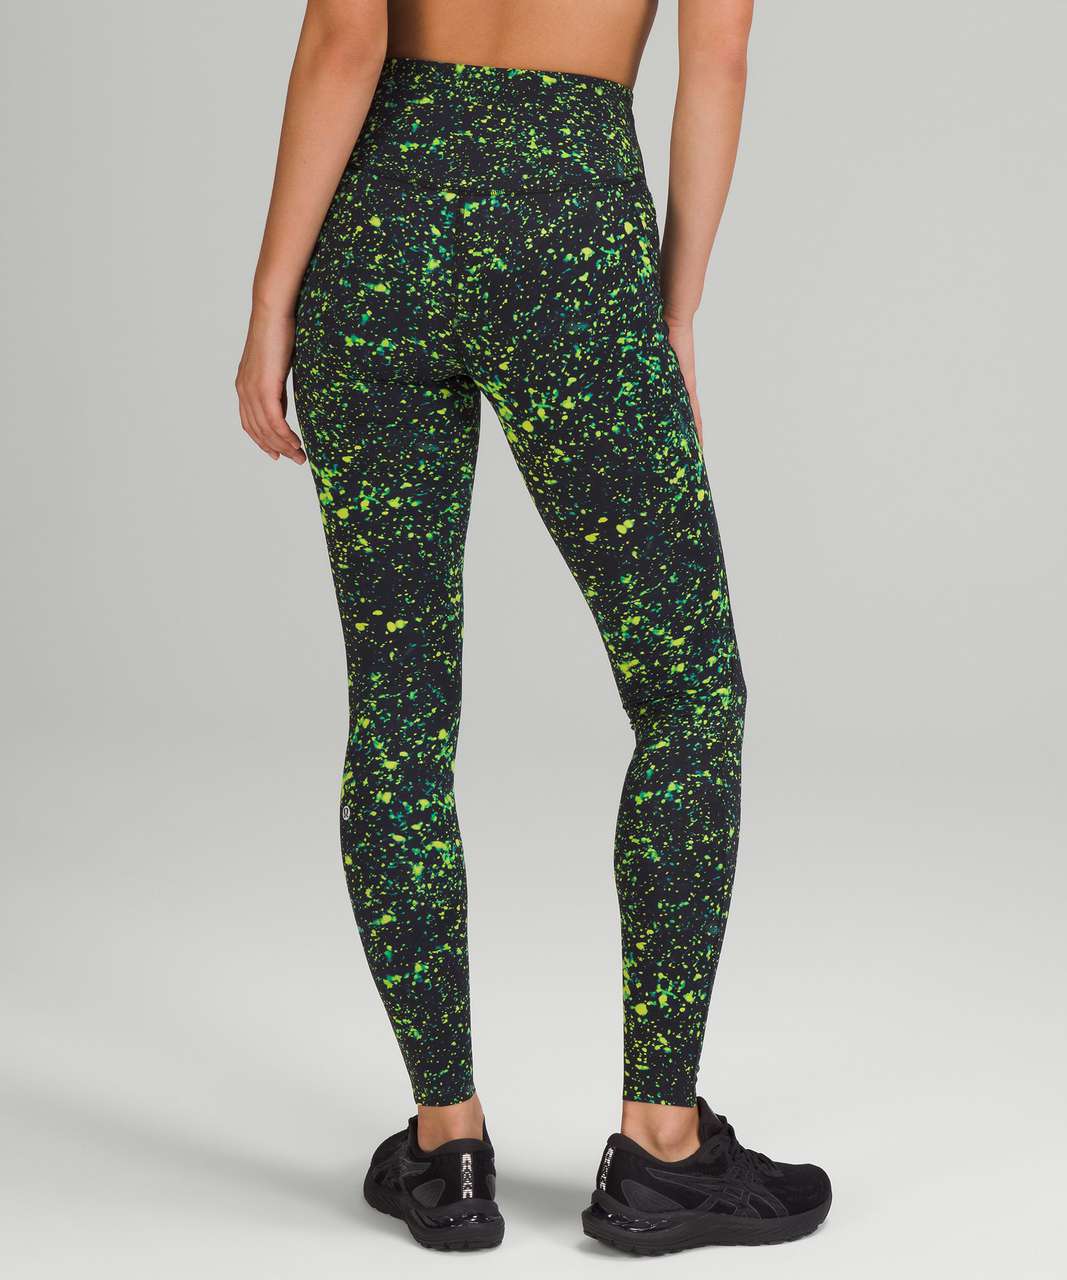 Lululemon Base Pace High-Rise Running Tight 28 - Sparks Fly Multi